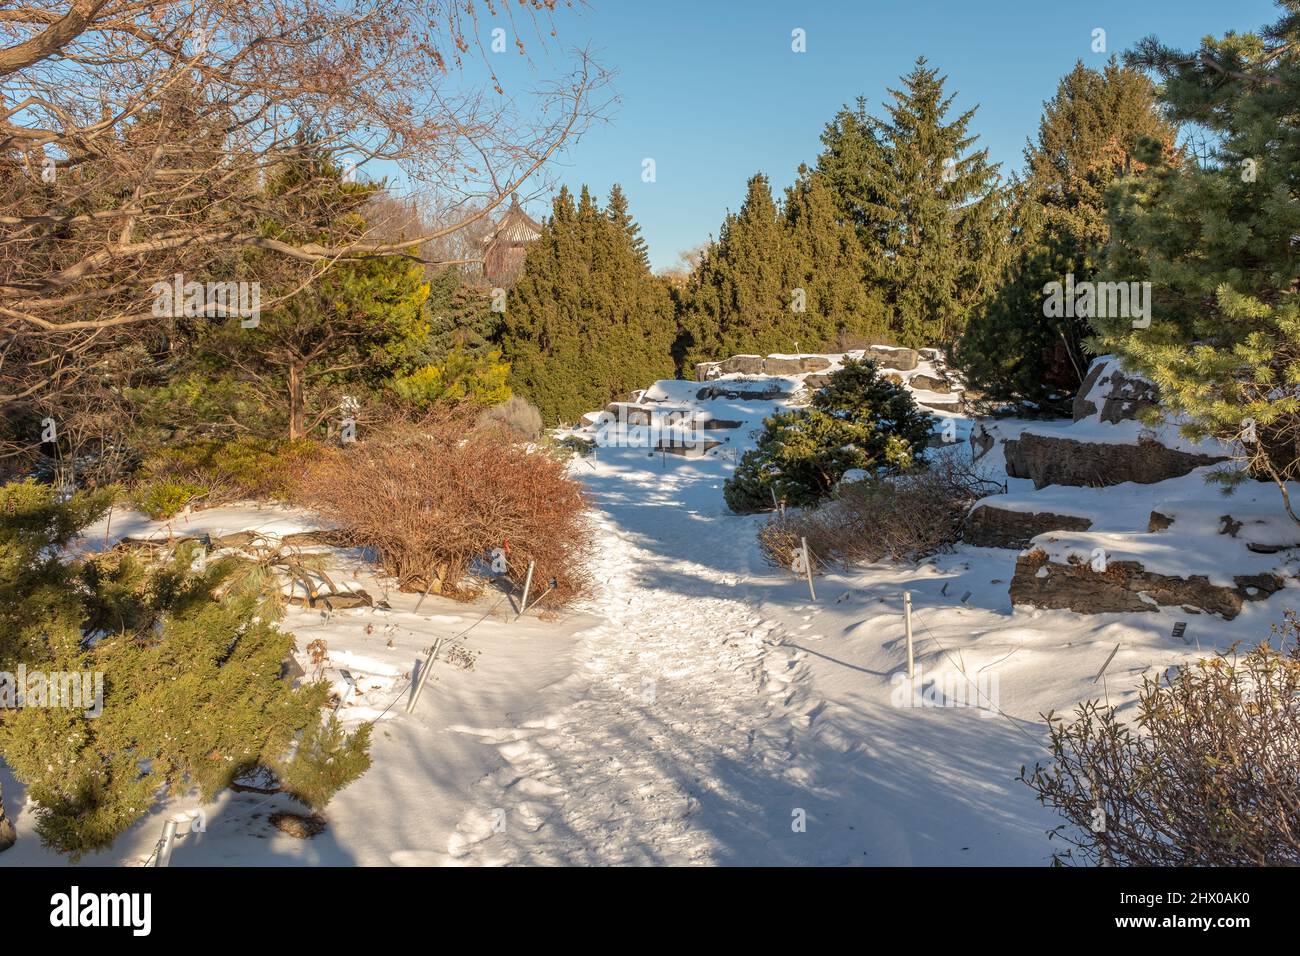 A pedestrian path covered with snow bordered with coniferous trees and shrubs at the Montreal's botanical garden, taken on a sunny winter day Stock Photo